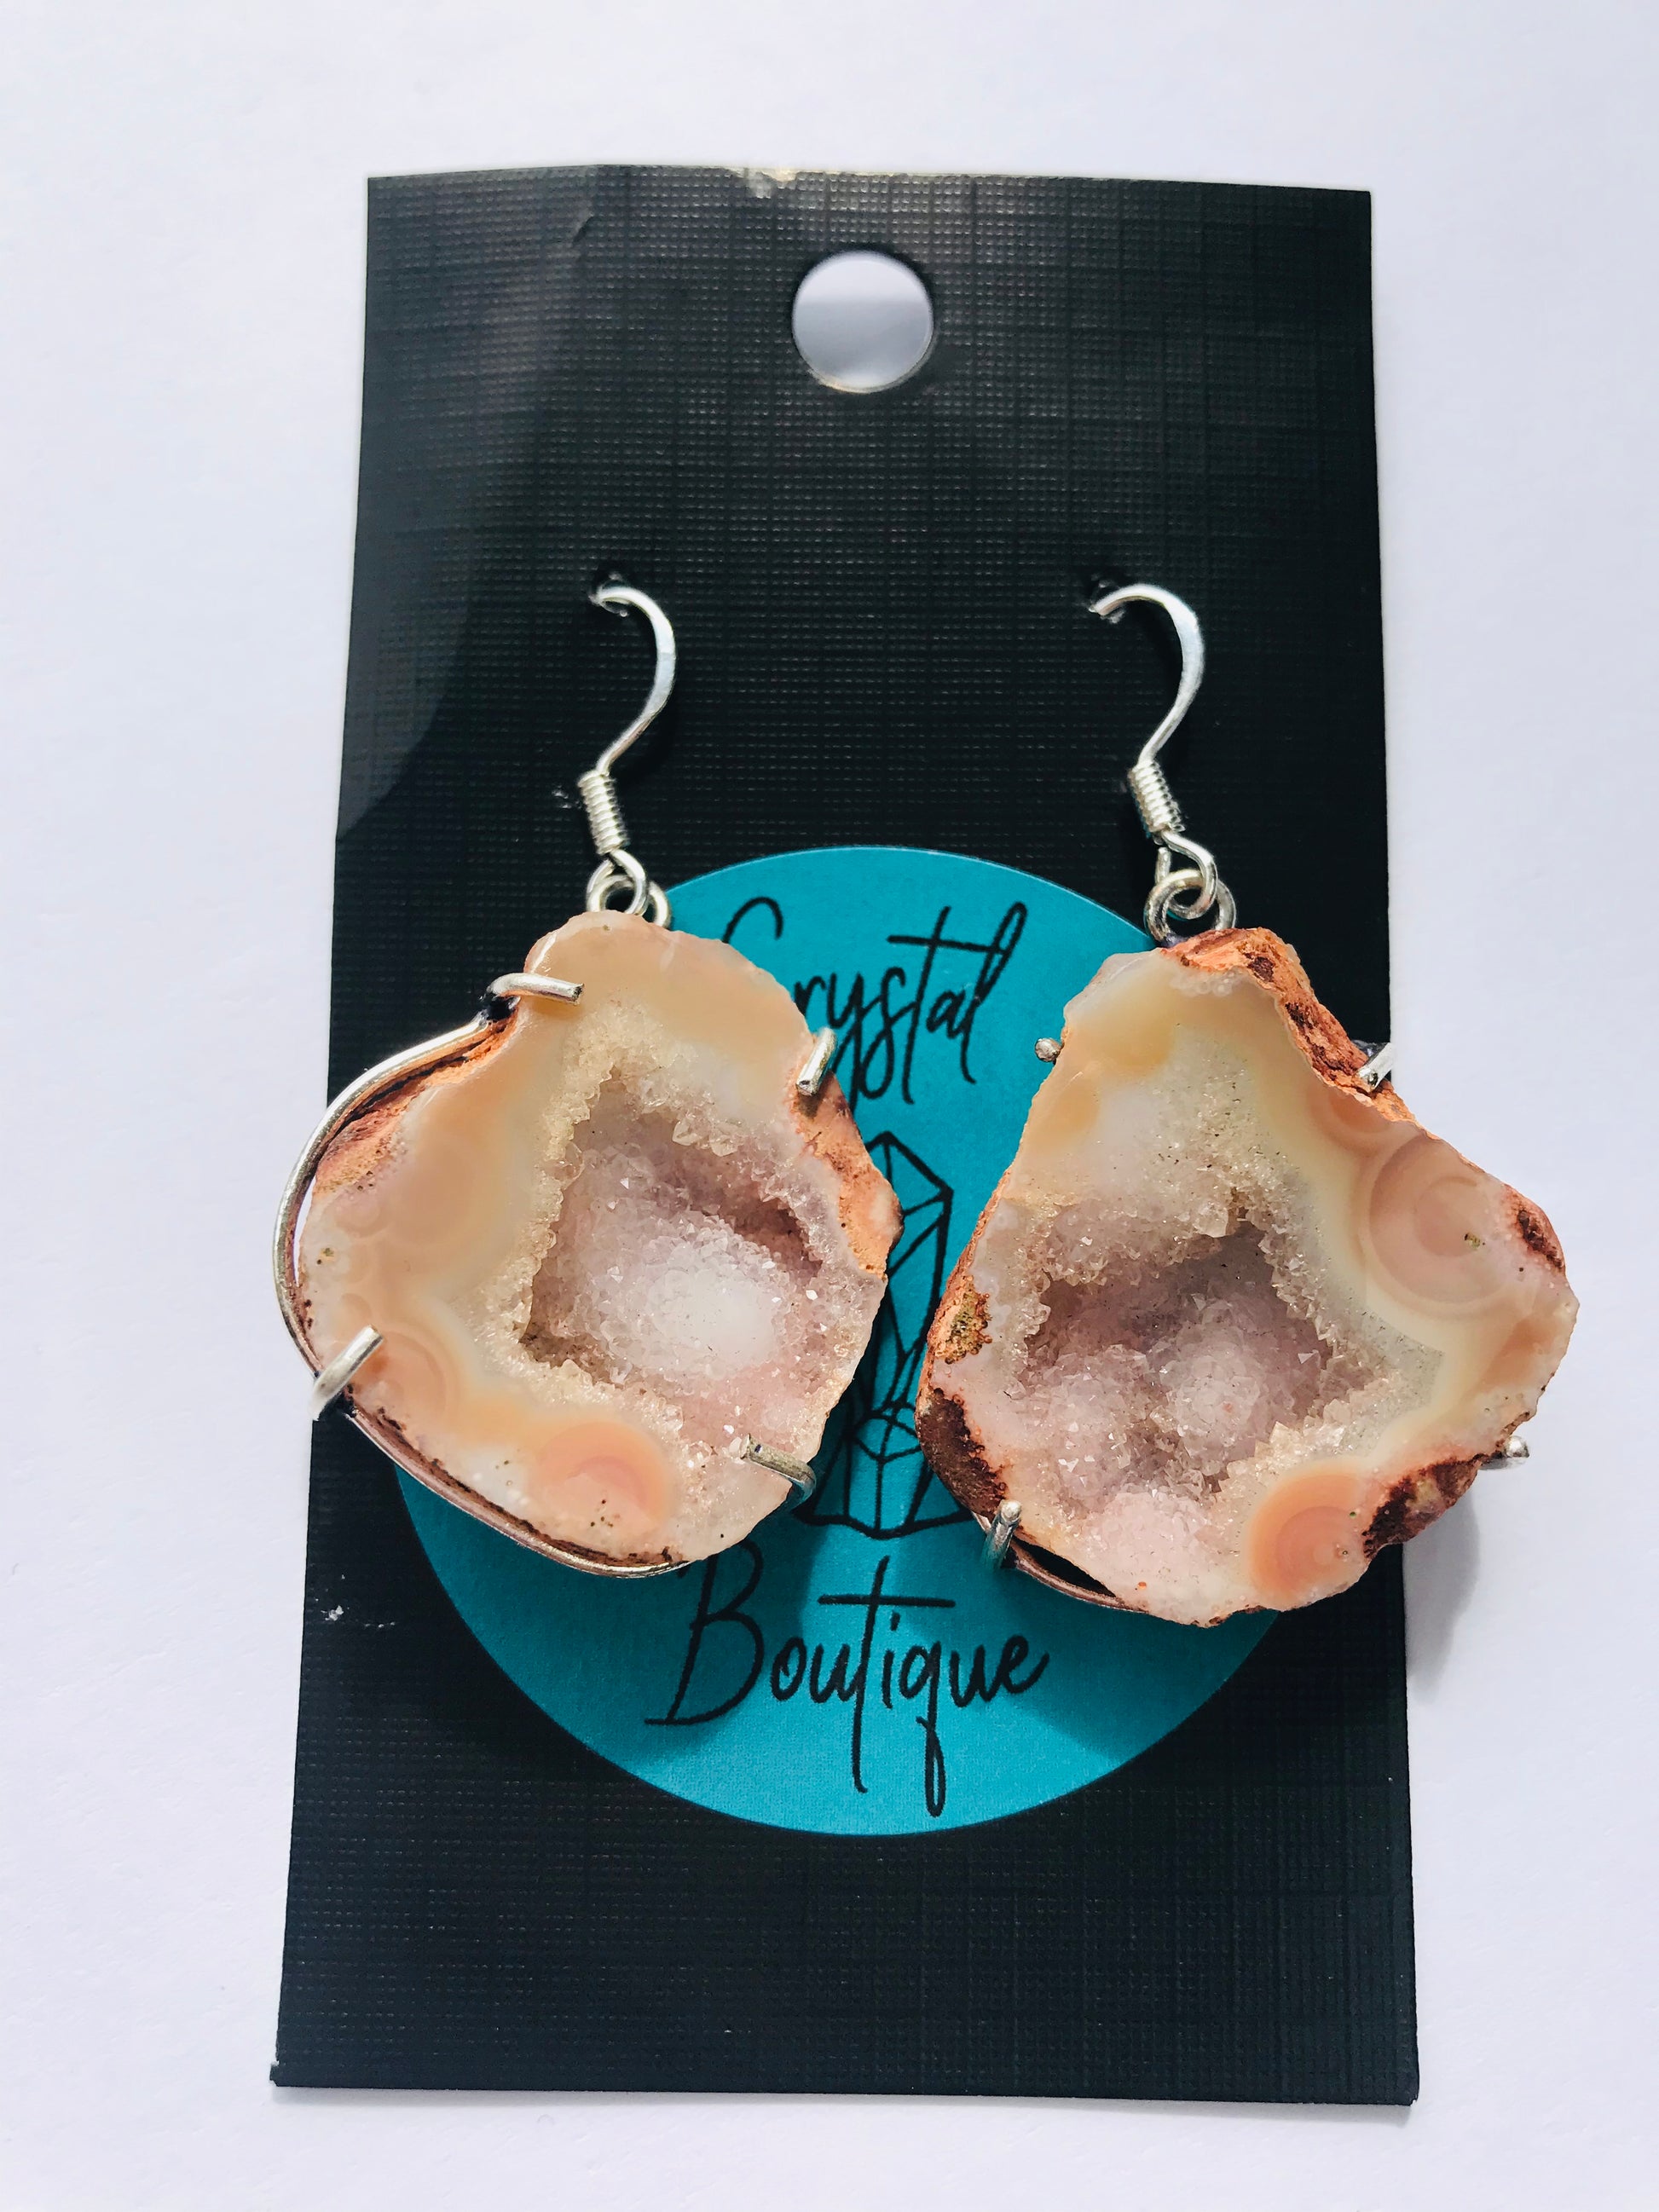 Druzy Crystal Geode Slice Gemstone Earrings Nude Collection - Crystal Boutique.co.uk